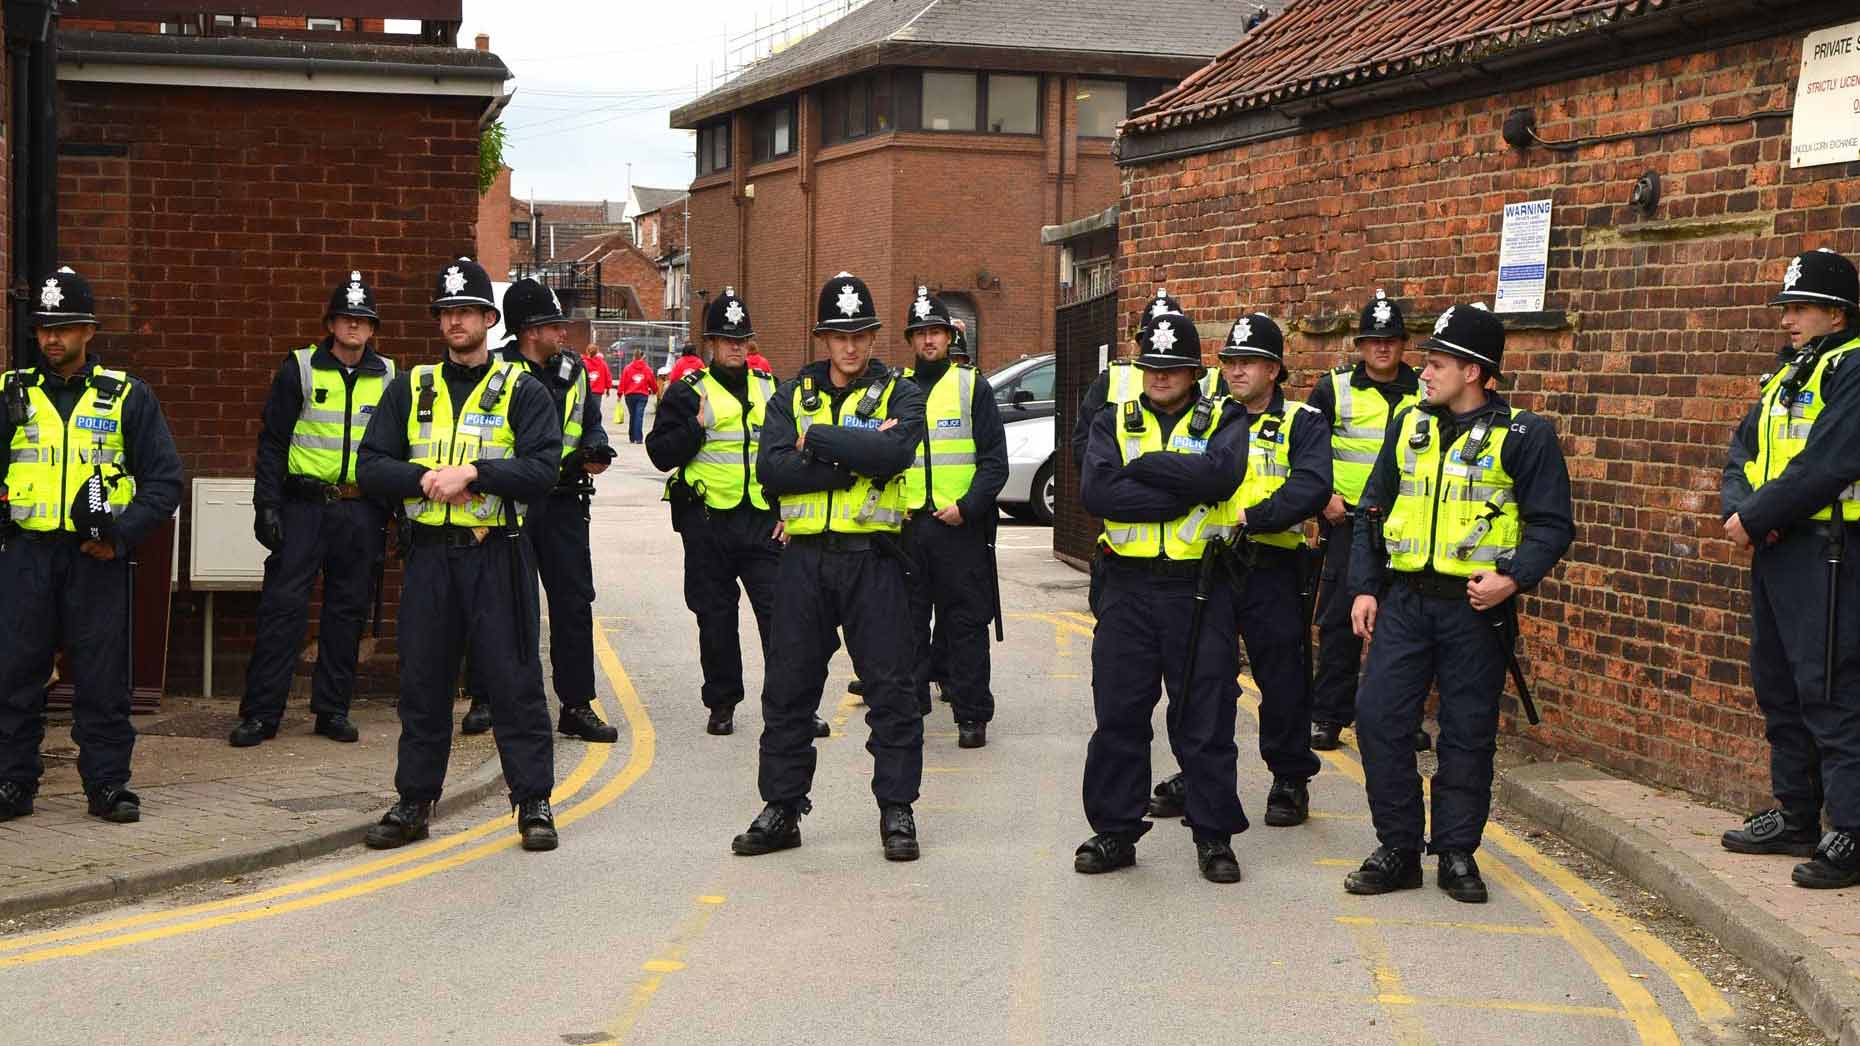 Police officers from across the region were present at the June 2013 anti-mosque protest in Lincoln. Photo: Steve Smailes for The Lincolnite